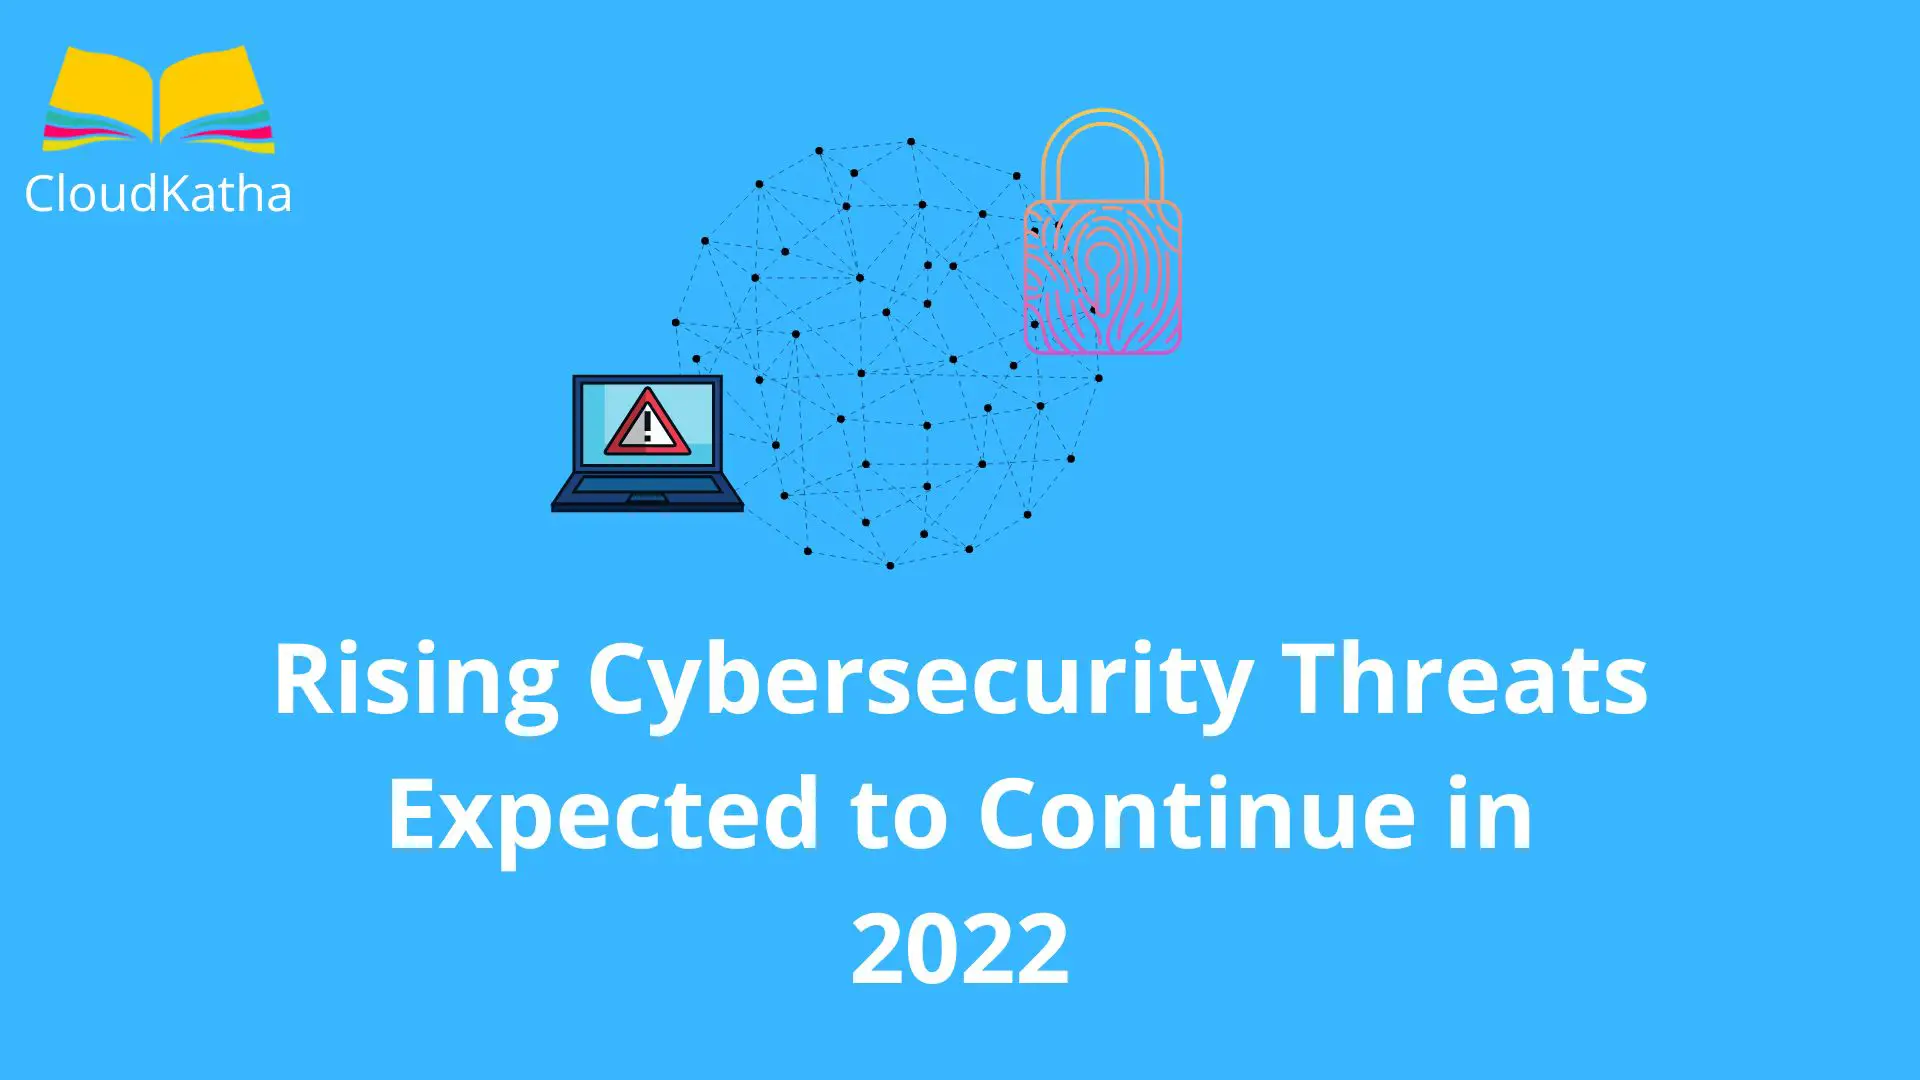 Rising Cybersecurity Threats Expected to Continue in 2022